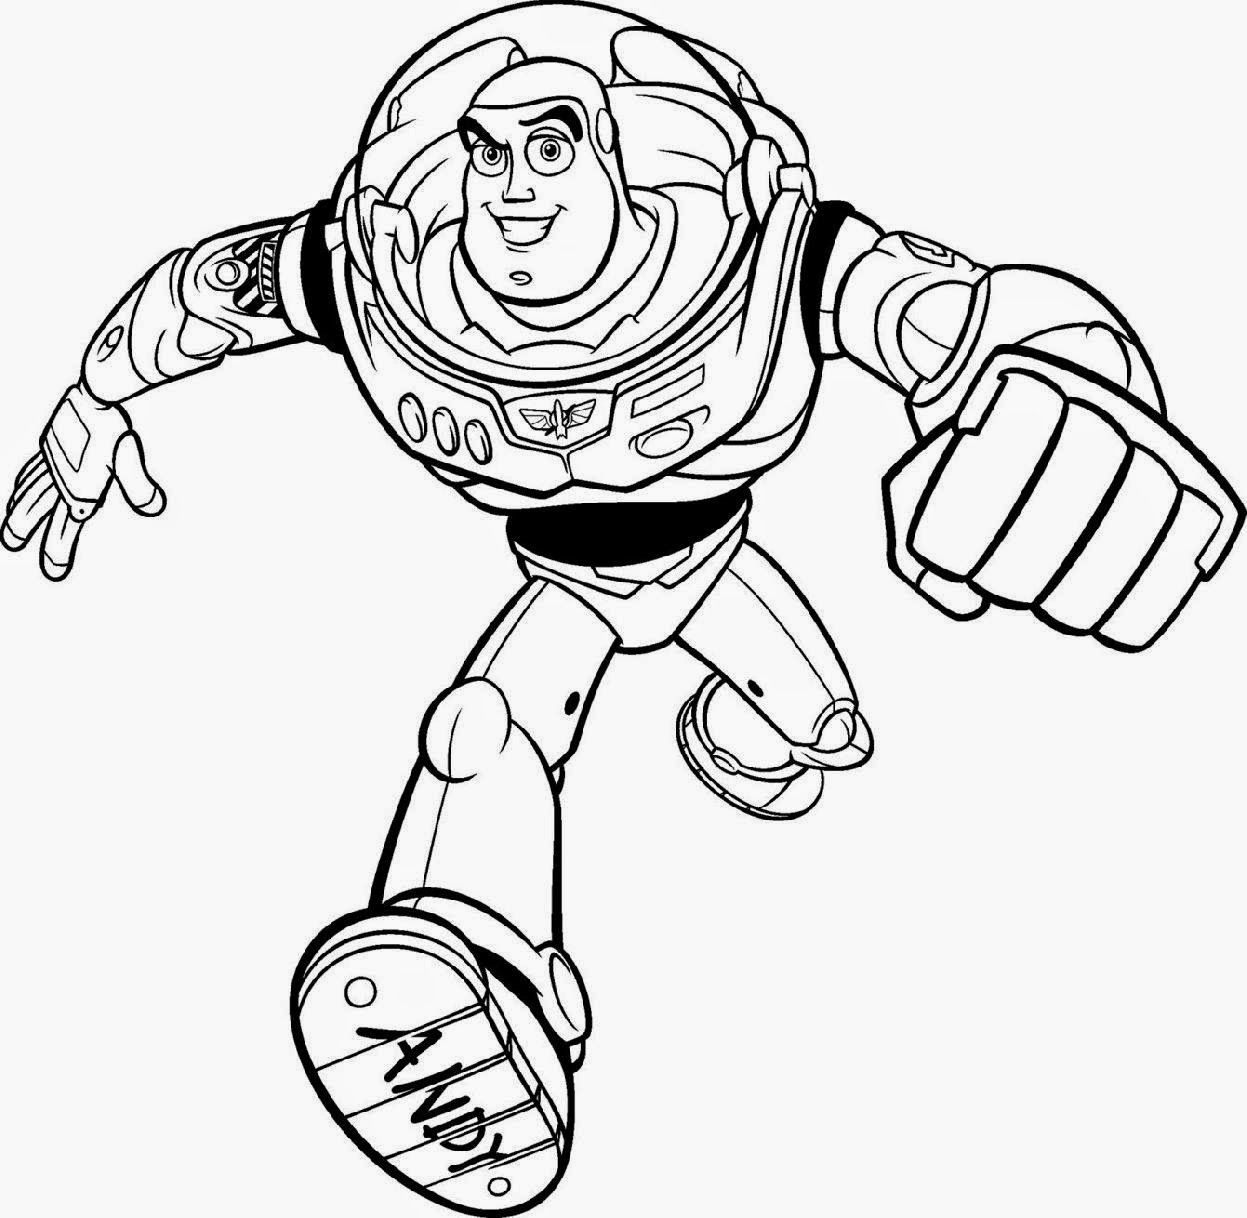 Ben Ten Coloring Pages | Free Coloring Pages